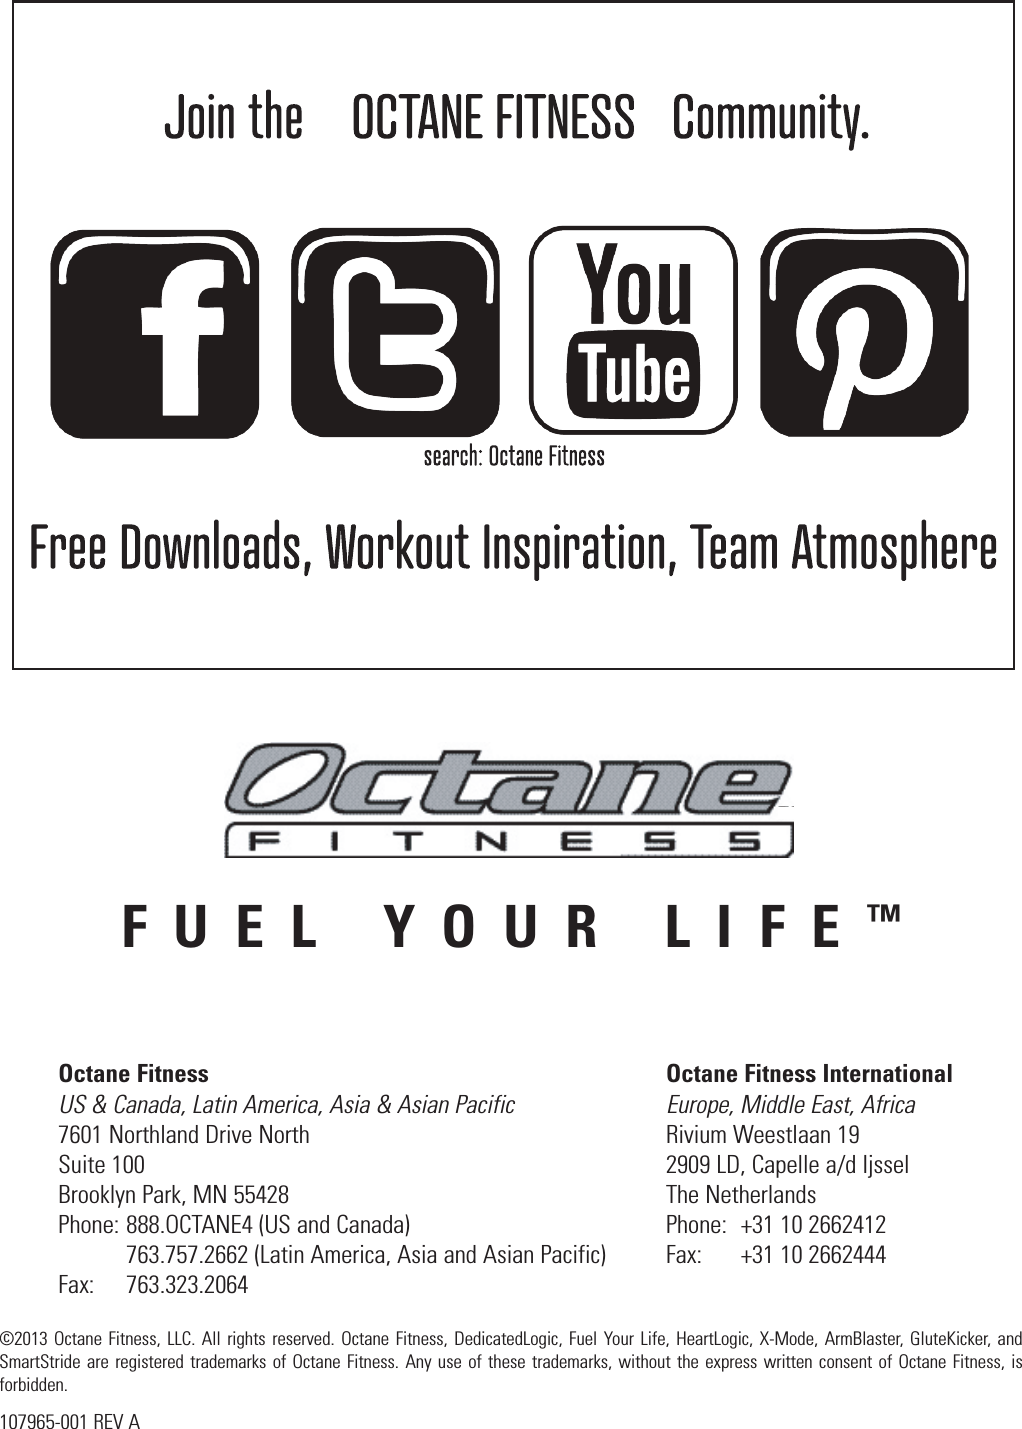 FUEL YOUR LIFE™Octane Fitness  Octane Fitness International US &amp; Canada, Latin America, Asia &amp; Asian Pacific  Europe, Middle East, Africa 7601 Northland Drive North  Rivium Weestlaan 19 Suite 100  2909 LD, Capelle a/d Ijssel Brooklyn Park, MN 55428  The Netherlands Phone: 888.OCTANE4 (US and Canada)  Phone:  +31 10 2662412   763.757.2662 (Latin America, Asia and Asian Pacific)  Fax:  +31 10 2662444 Fax:   763.323.2064©2013 Octane Fitness, LLC. All rights reserved. Octane Fitness, DedicatedLogic, Fuel Your Life, HeartLogic, X-Mode, ArmBlaster, GluteKicker, and SmartStride are registered trademarks of Octane Fitness. Any use of these trademarks, without the express written consent of Octane Fitness, is forbidden.107965-001 REV A